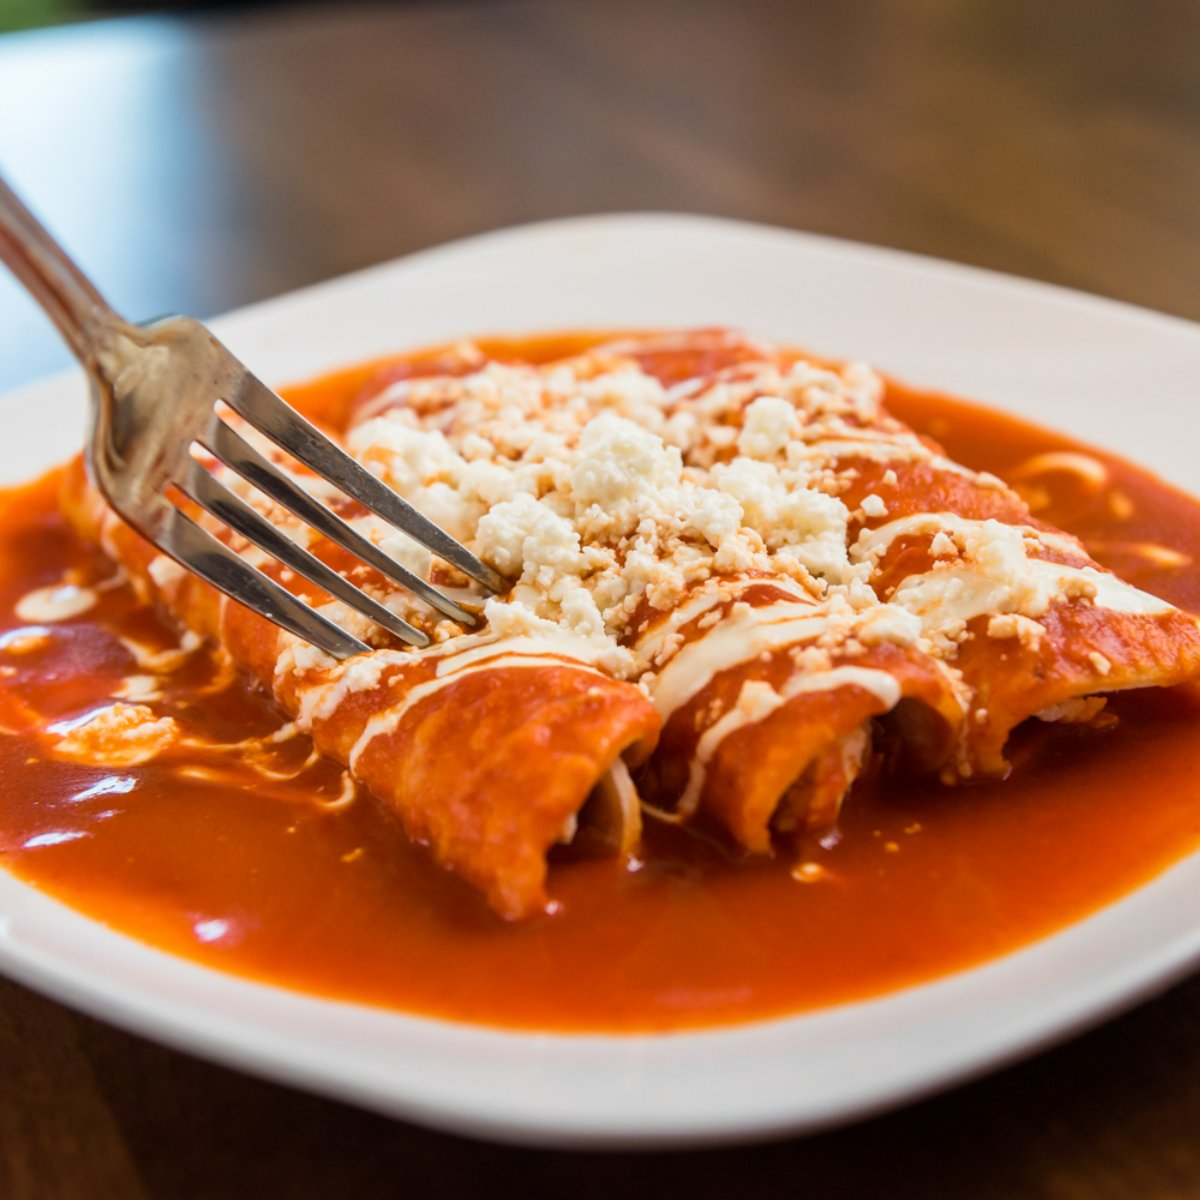 A true taste of Mexico awaits you at Luna Y Sol! Come grab a delicious forkful of our cheesy enchiladas this week. #MexicanCuisine